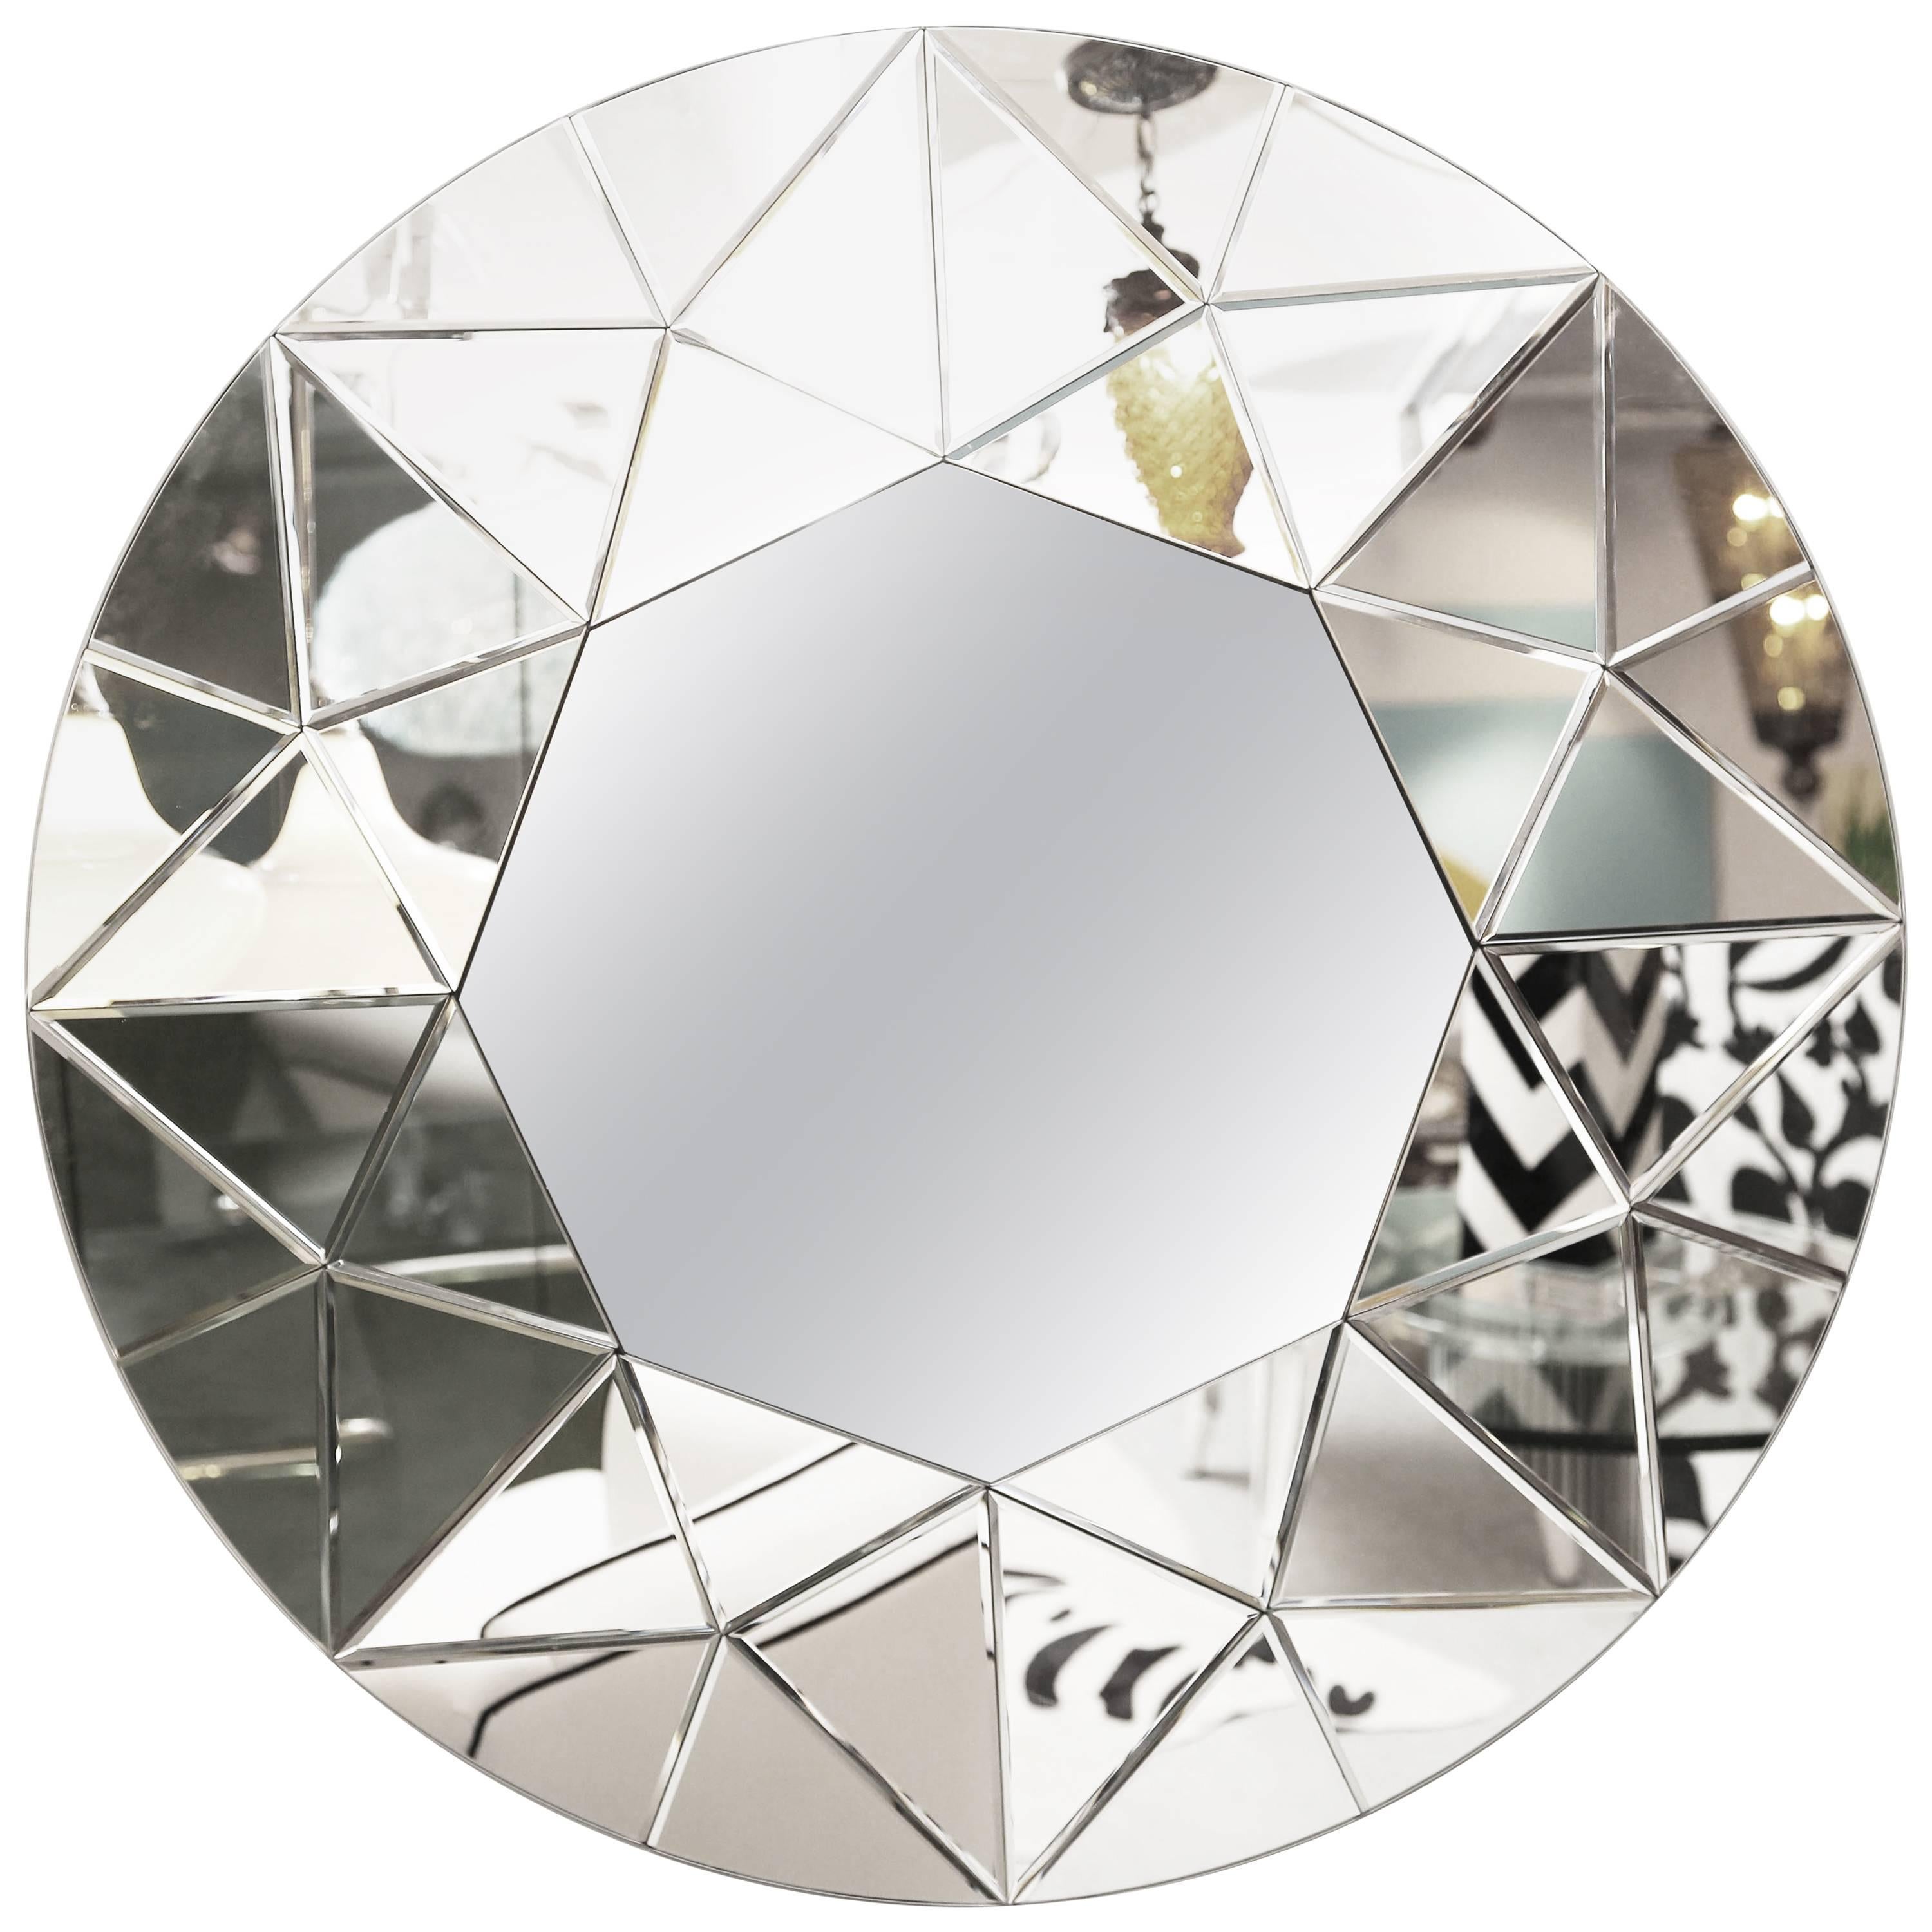 SALE!SALE!SALE!  MIRROR, ROUND BEVELED LARGE Elegant, Contemporary  was $2500 For Sale